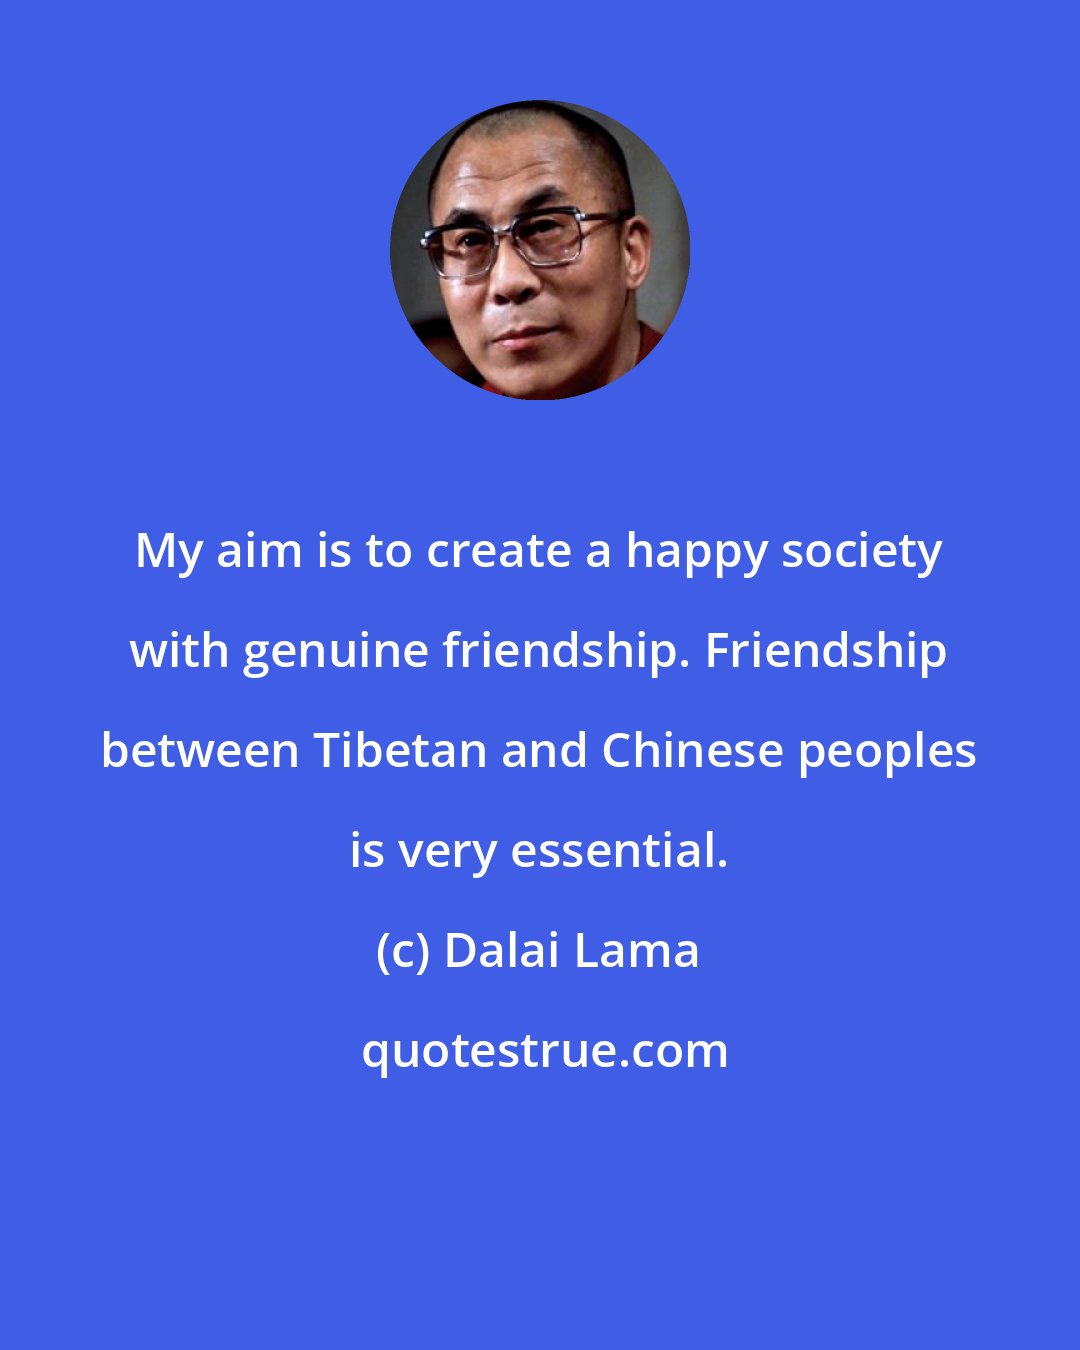 Dalai Lama: My aim is to create a happy society with genuine friendship. Friendship between Tibetan and Chinese peoples is very essential.